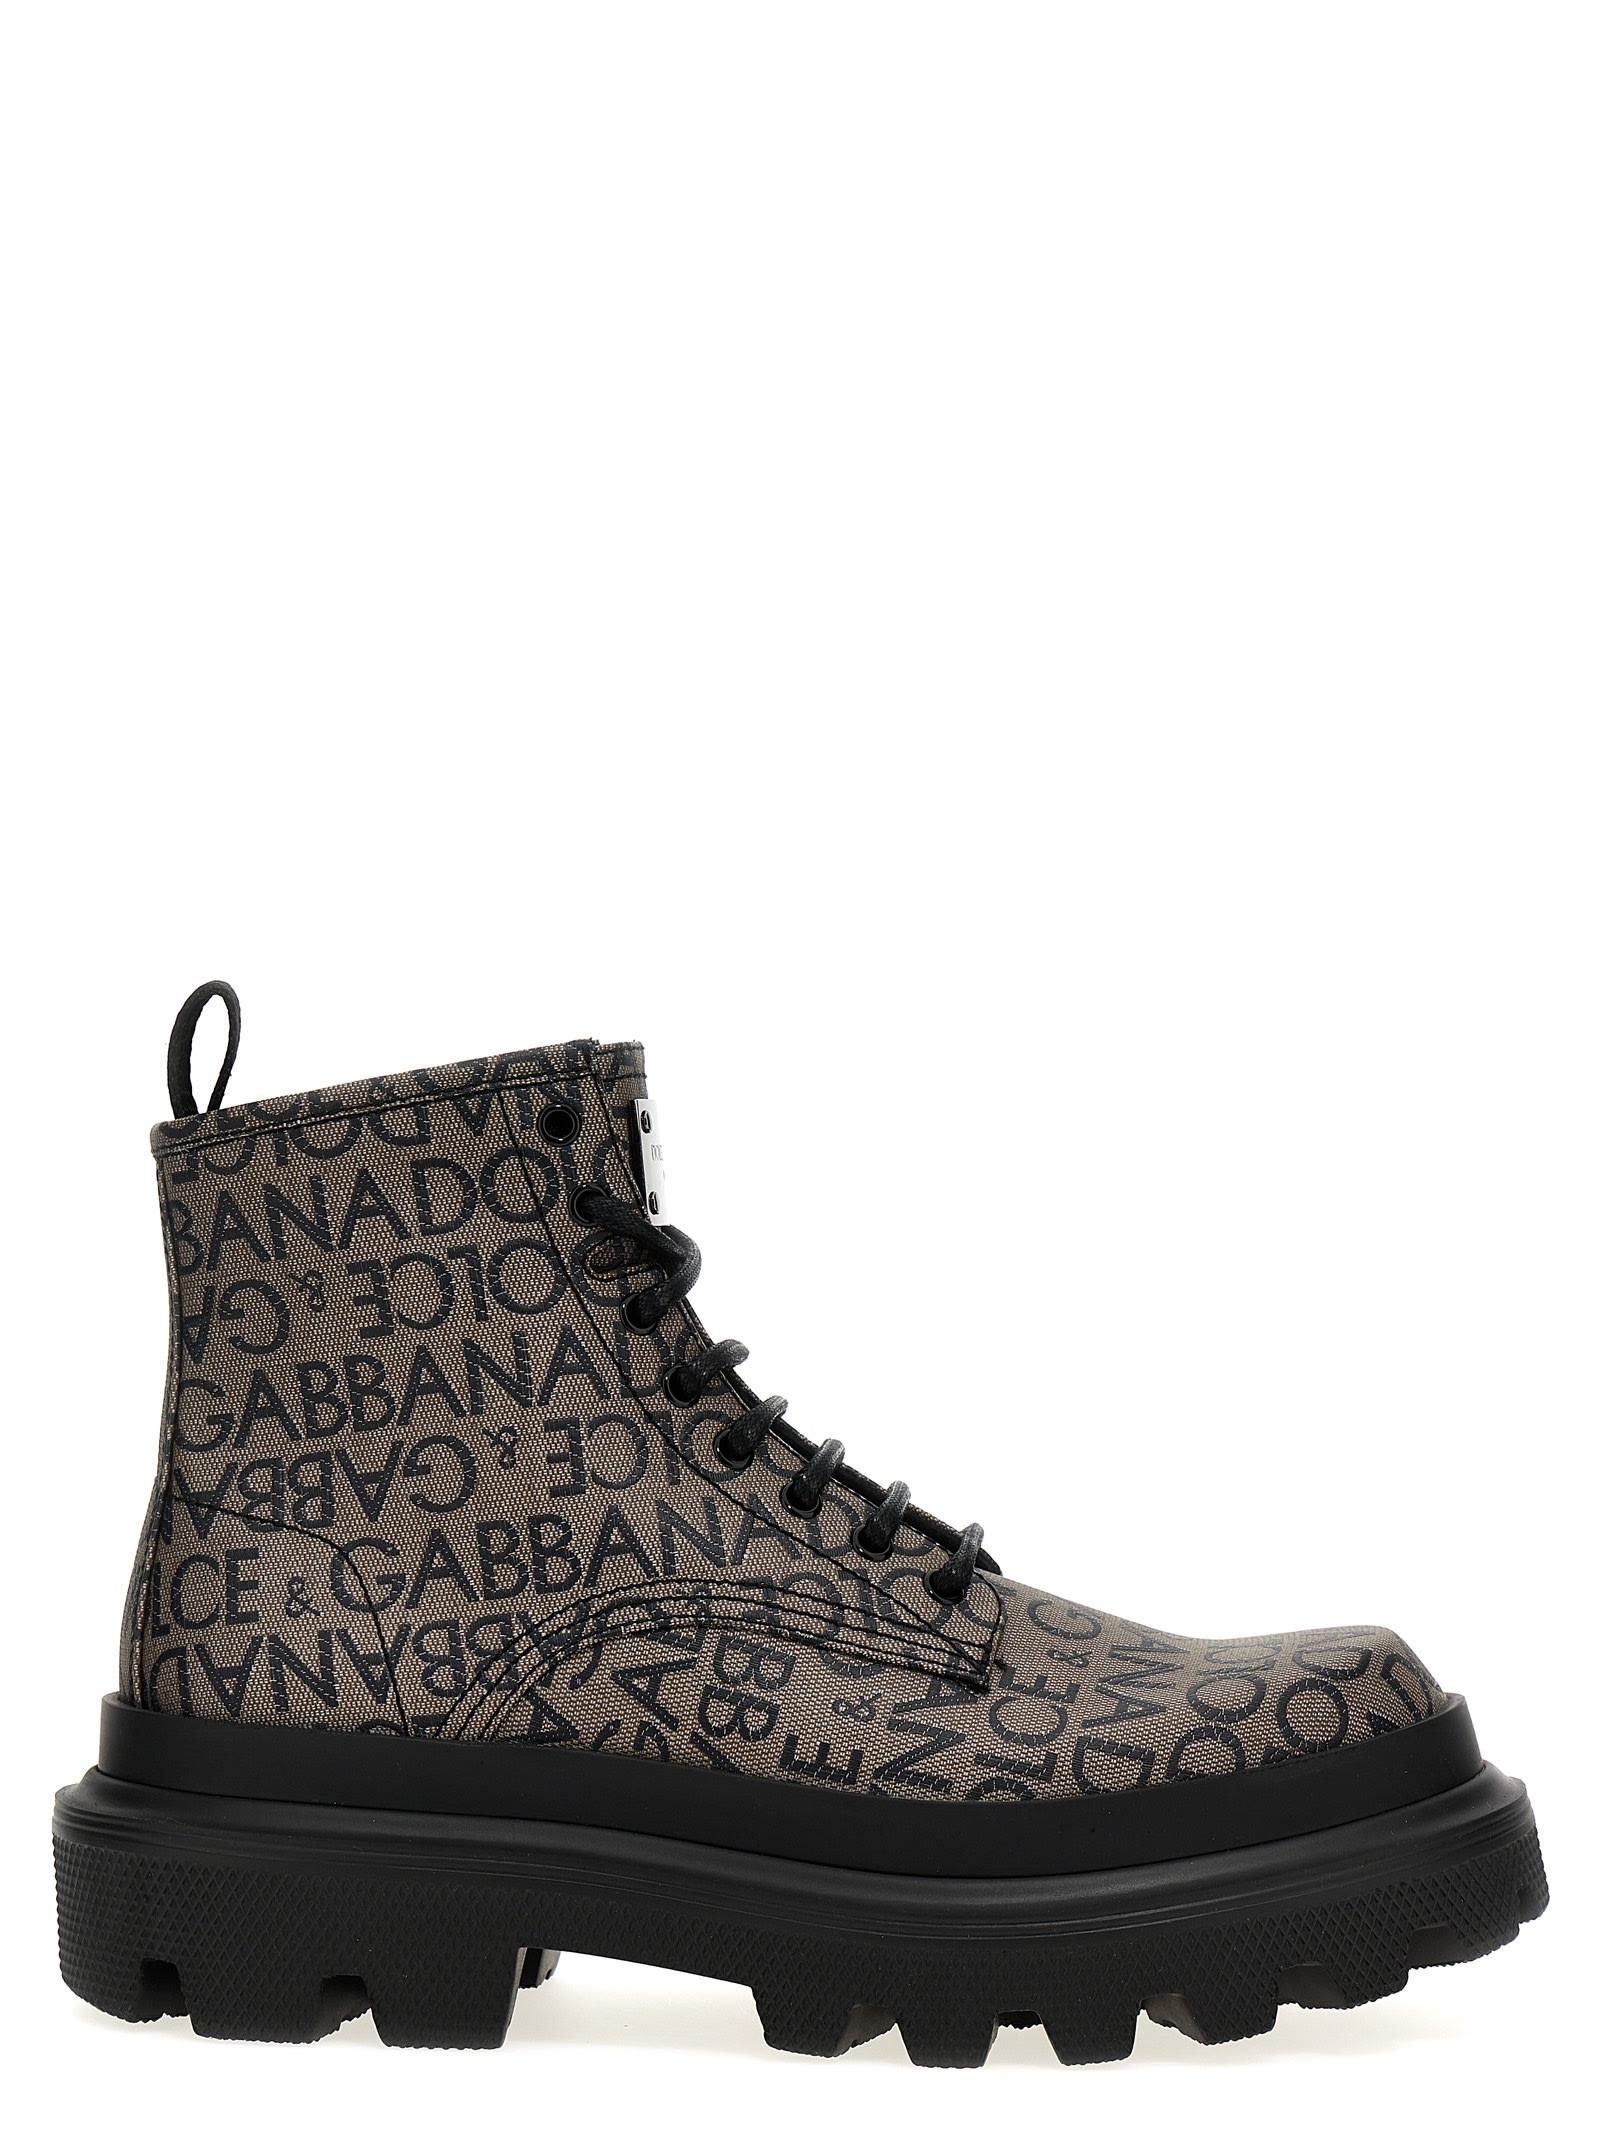 Dolce & Gabbana Jacquard Logo Combat Boots Boots, Ankle Boots in Black for  Men | Lyst